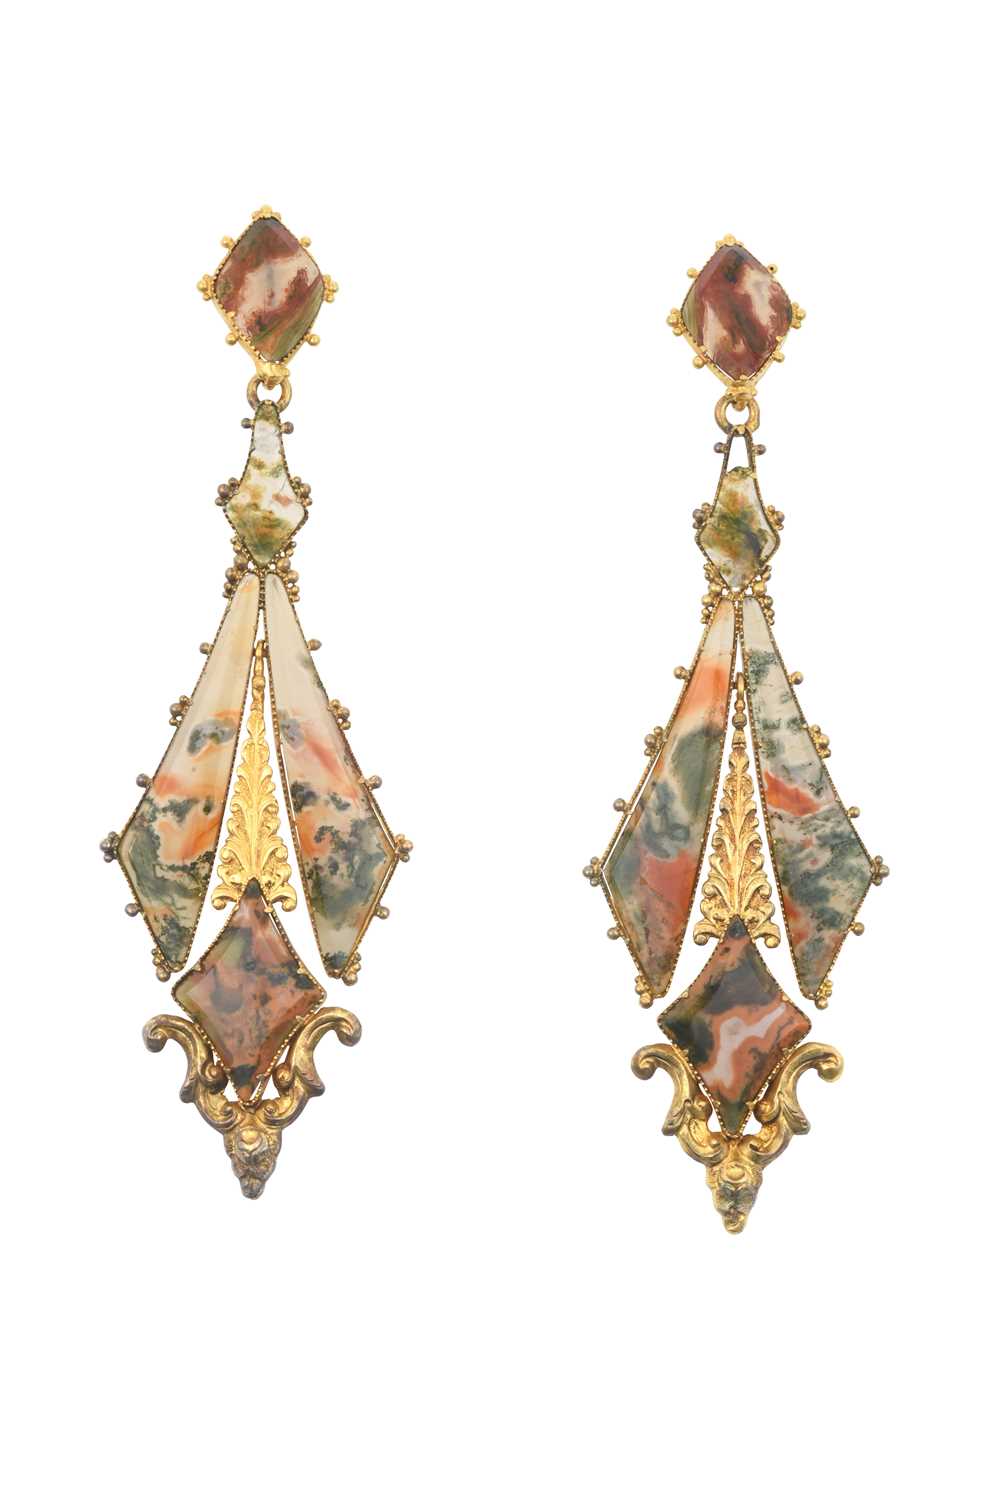 A Pair of Victorian Moss Agate Drop Earrings the vari-shaped moss agate plaques in yellow claw